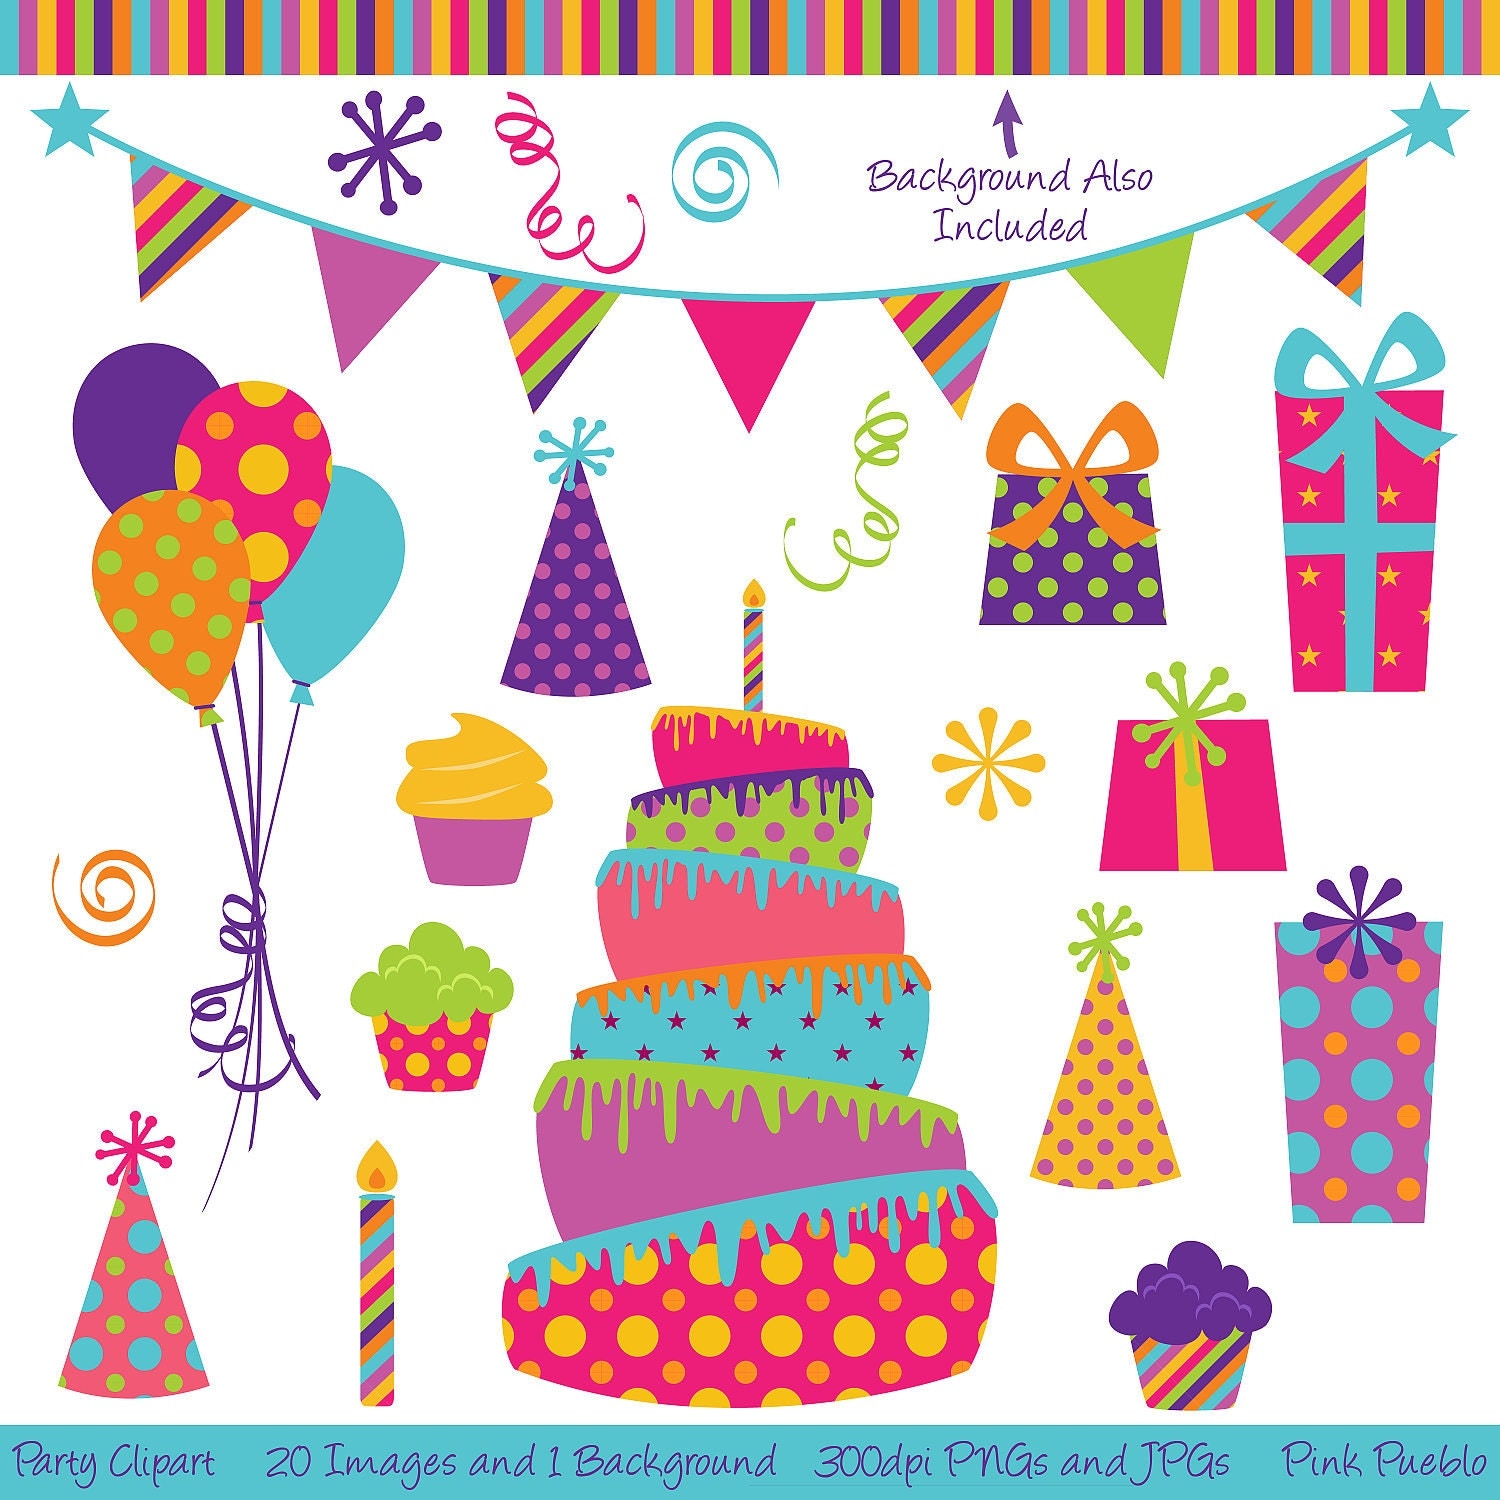 free clipart images birthday party - photo #33